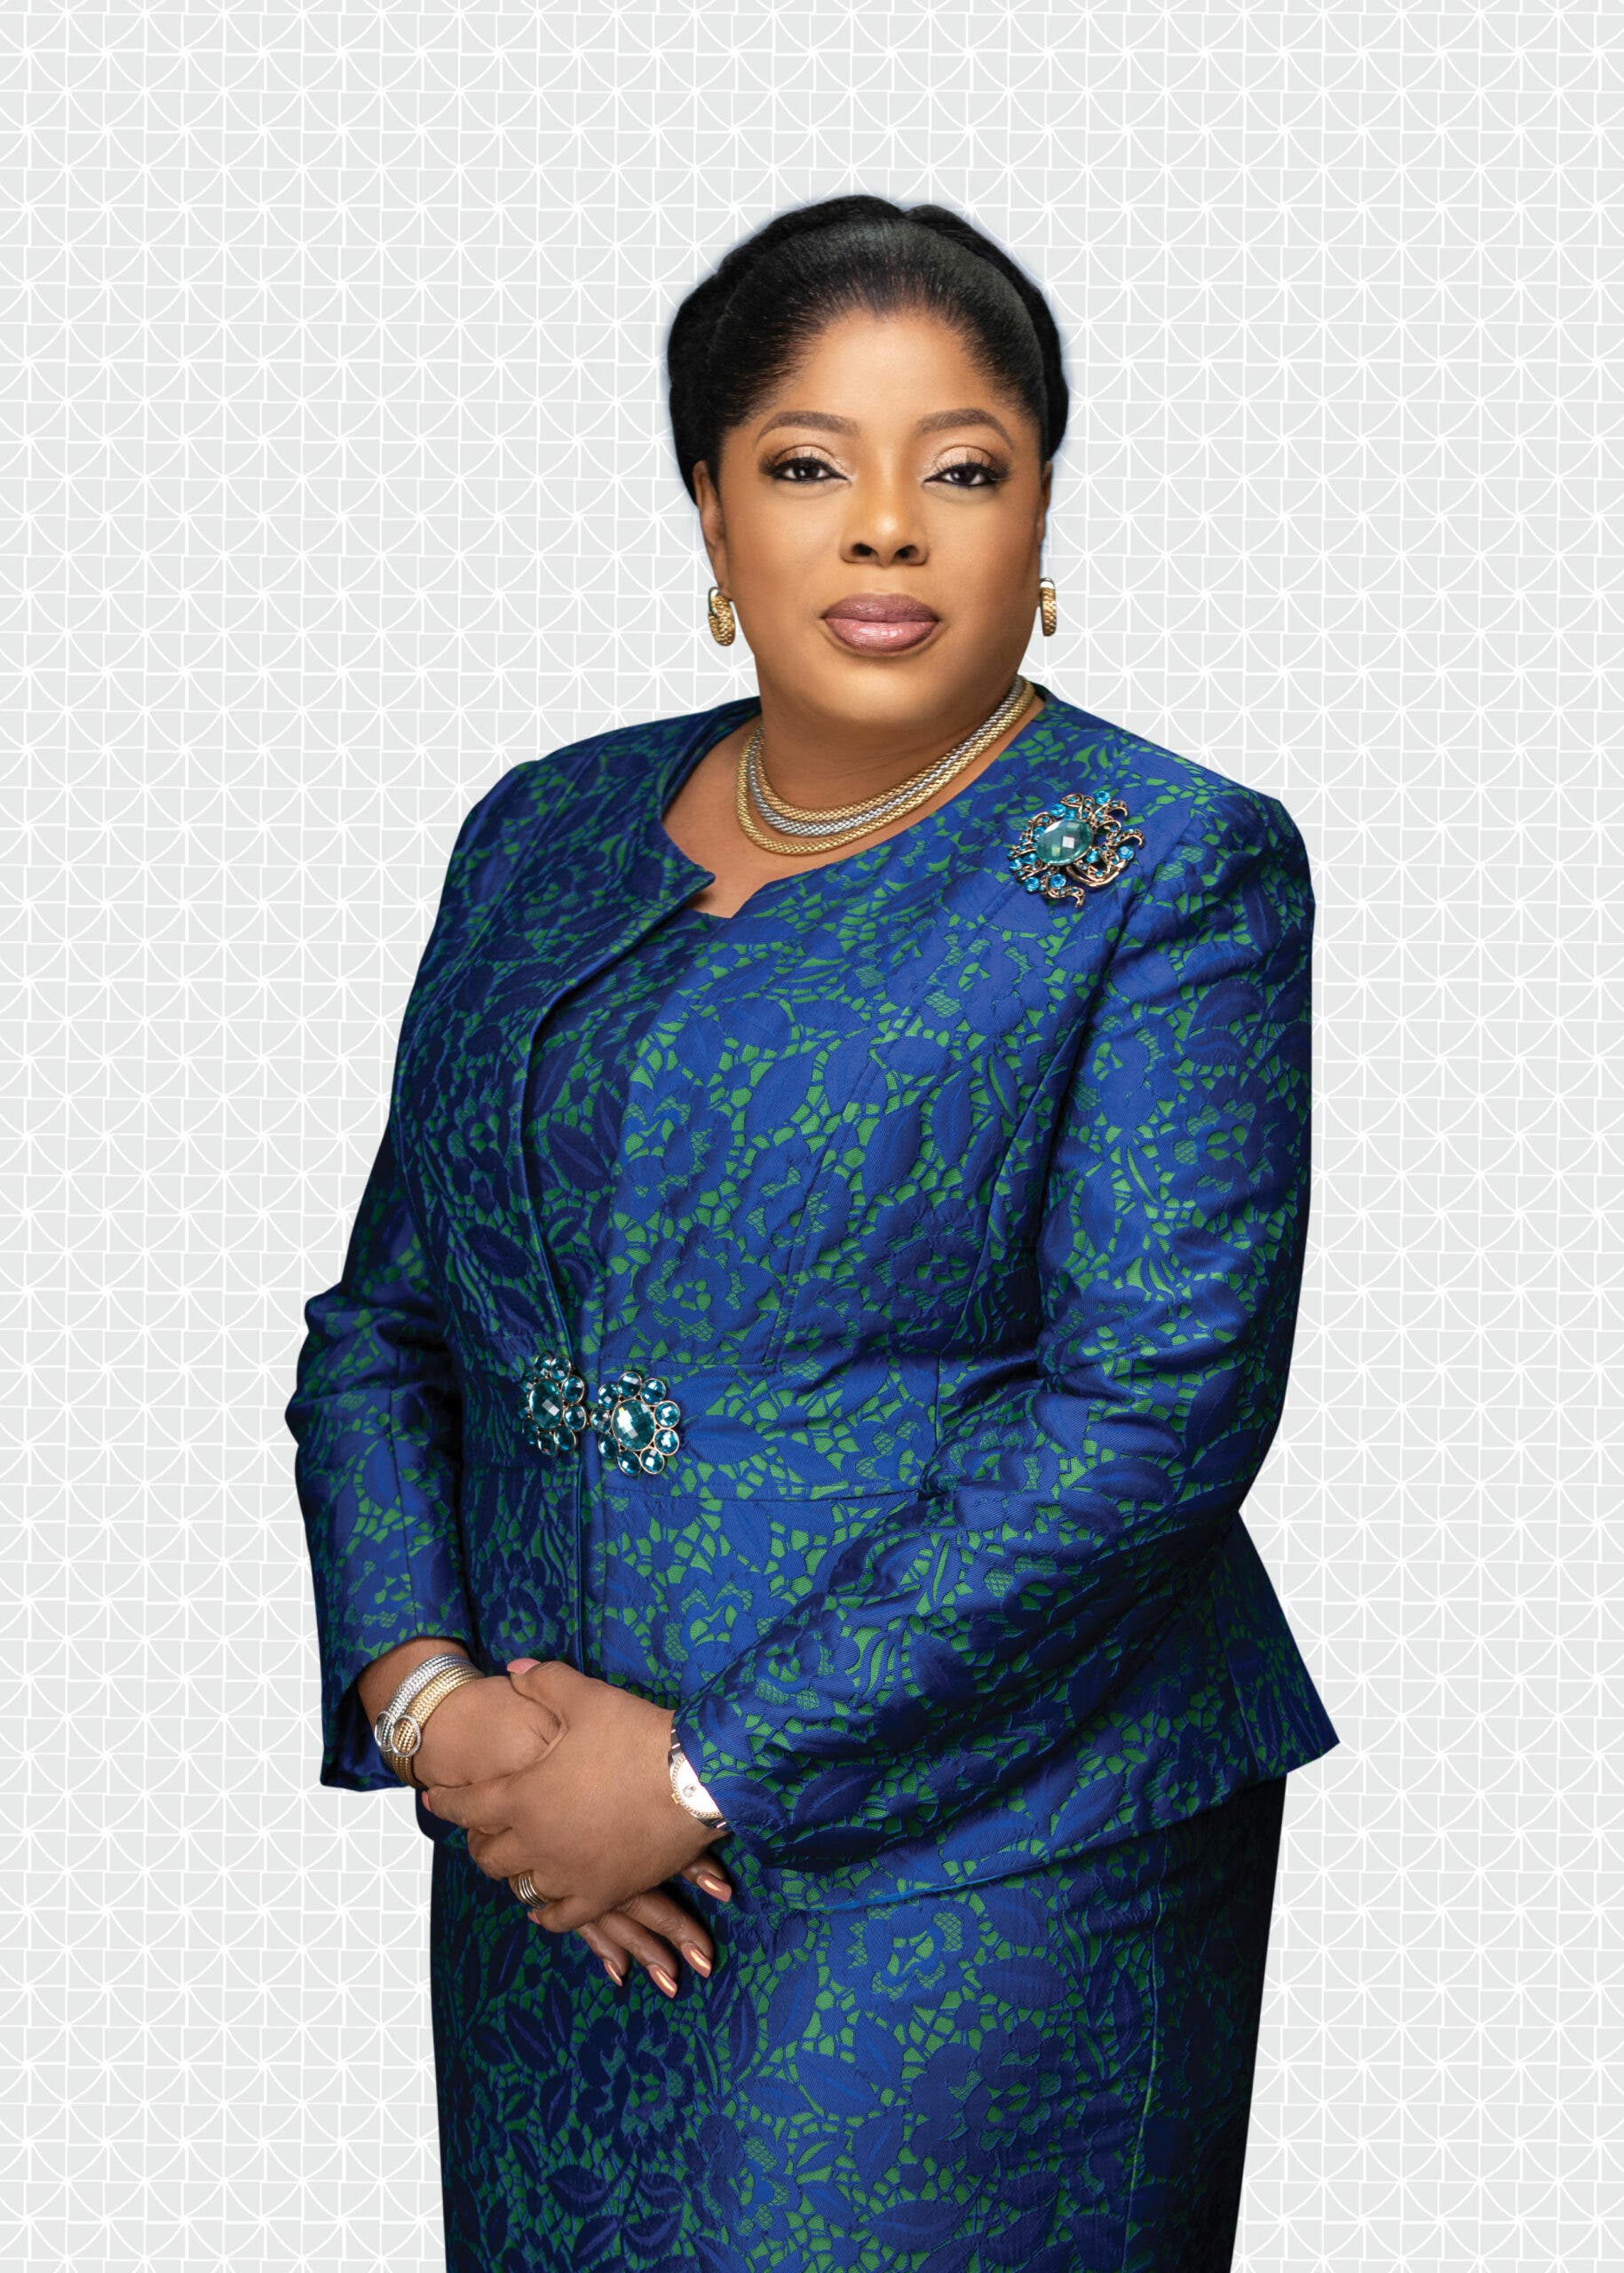 New MD of Fidelity Bank, Onyeali-Ikpe assumes office